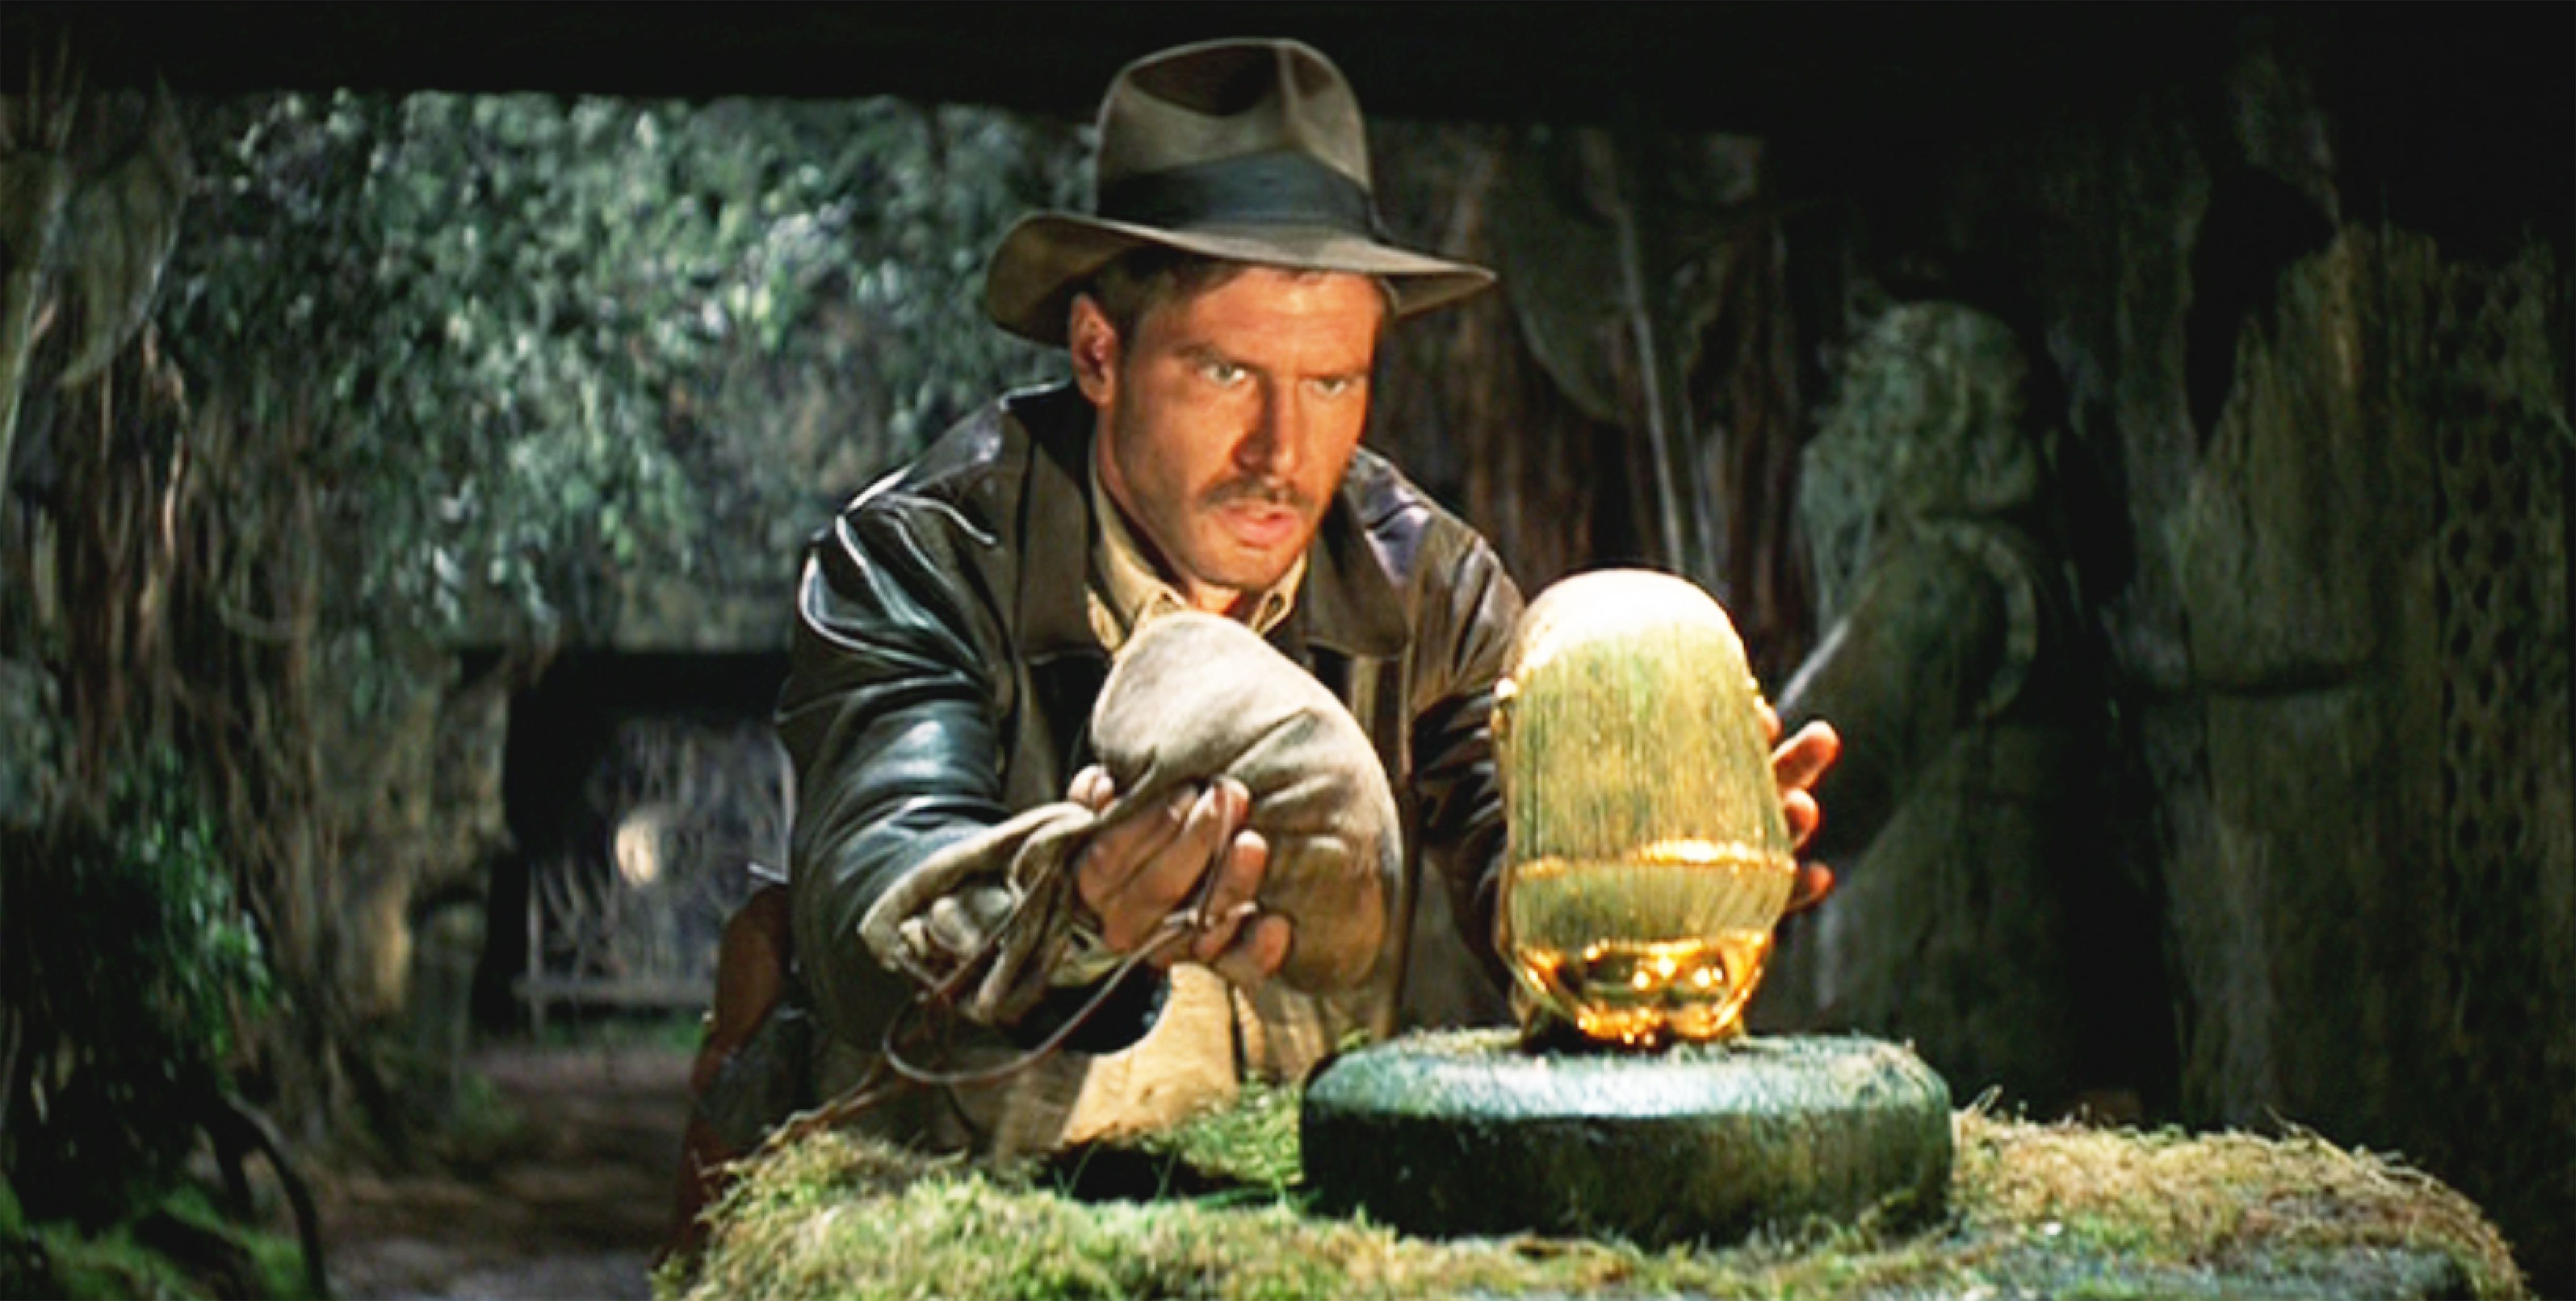 A travel guide to Indiana Jones' best filming locations